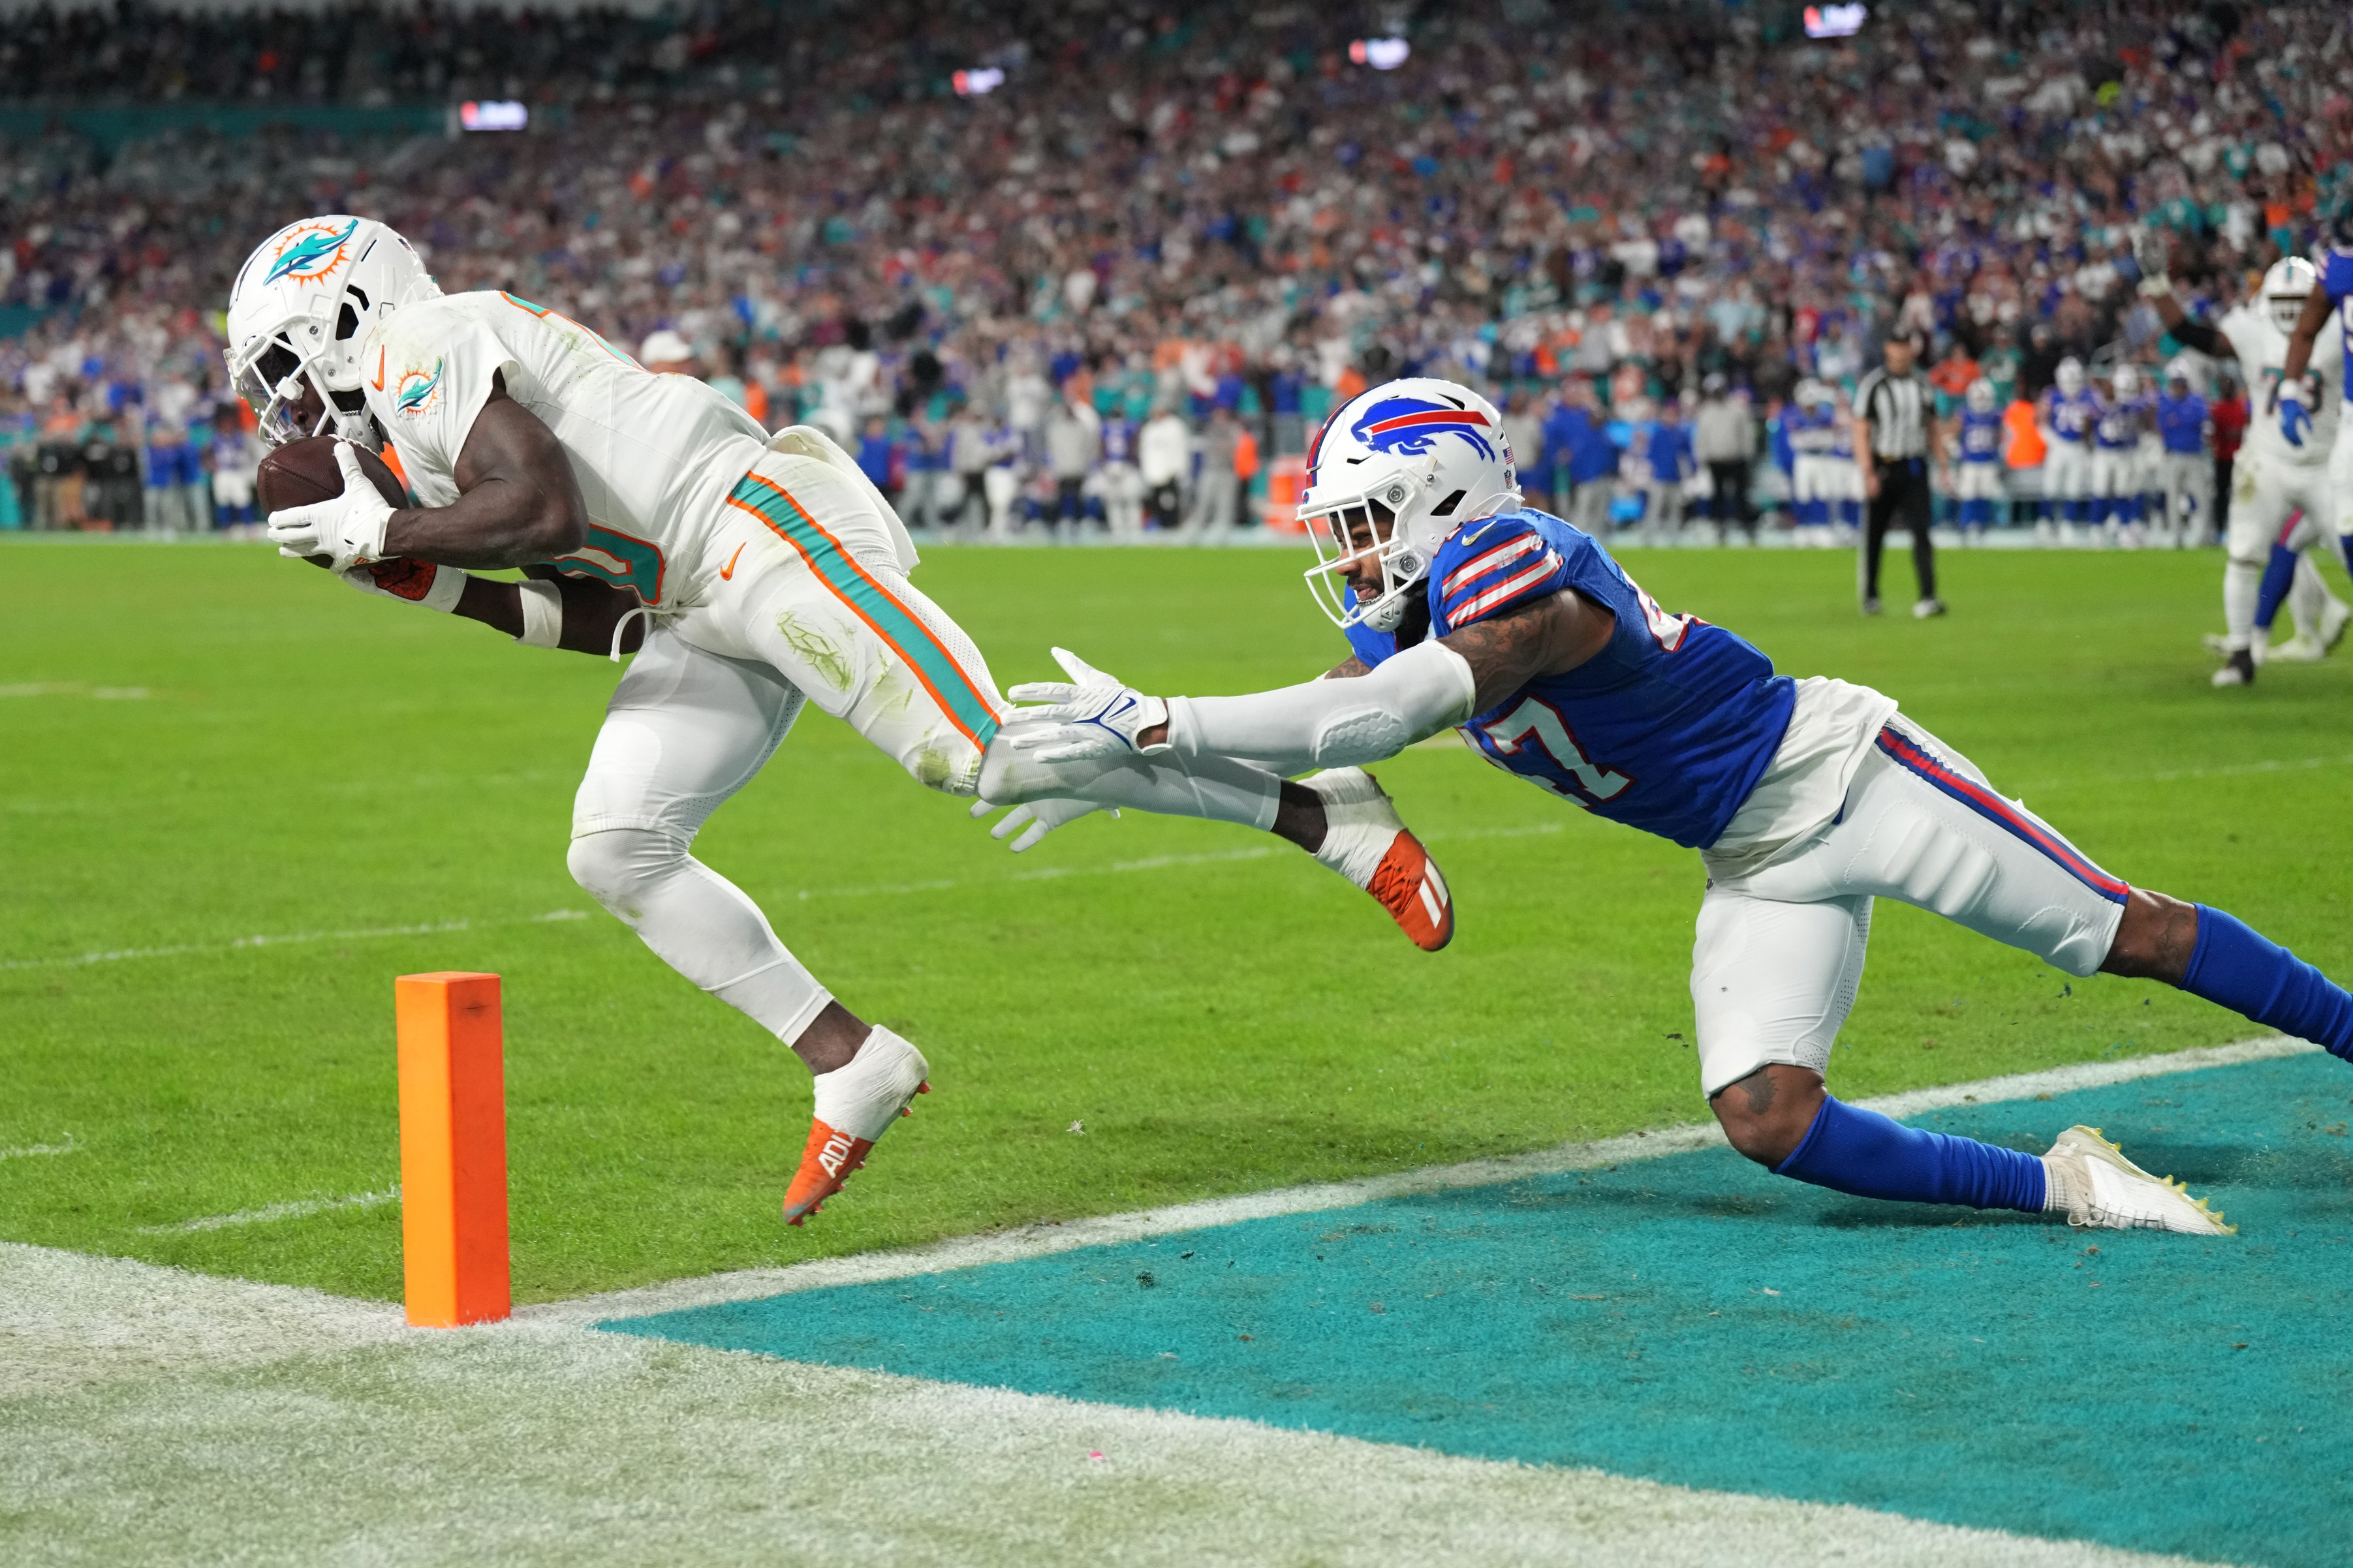 Dolphins receiver Tyreek Hill scored a touchdown against Buffalo but it wasn't enough to beat the Bills for the AFC East title in Week 18.